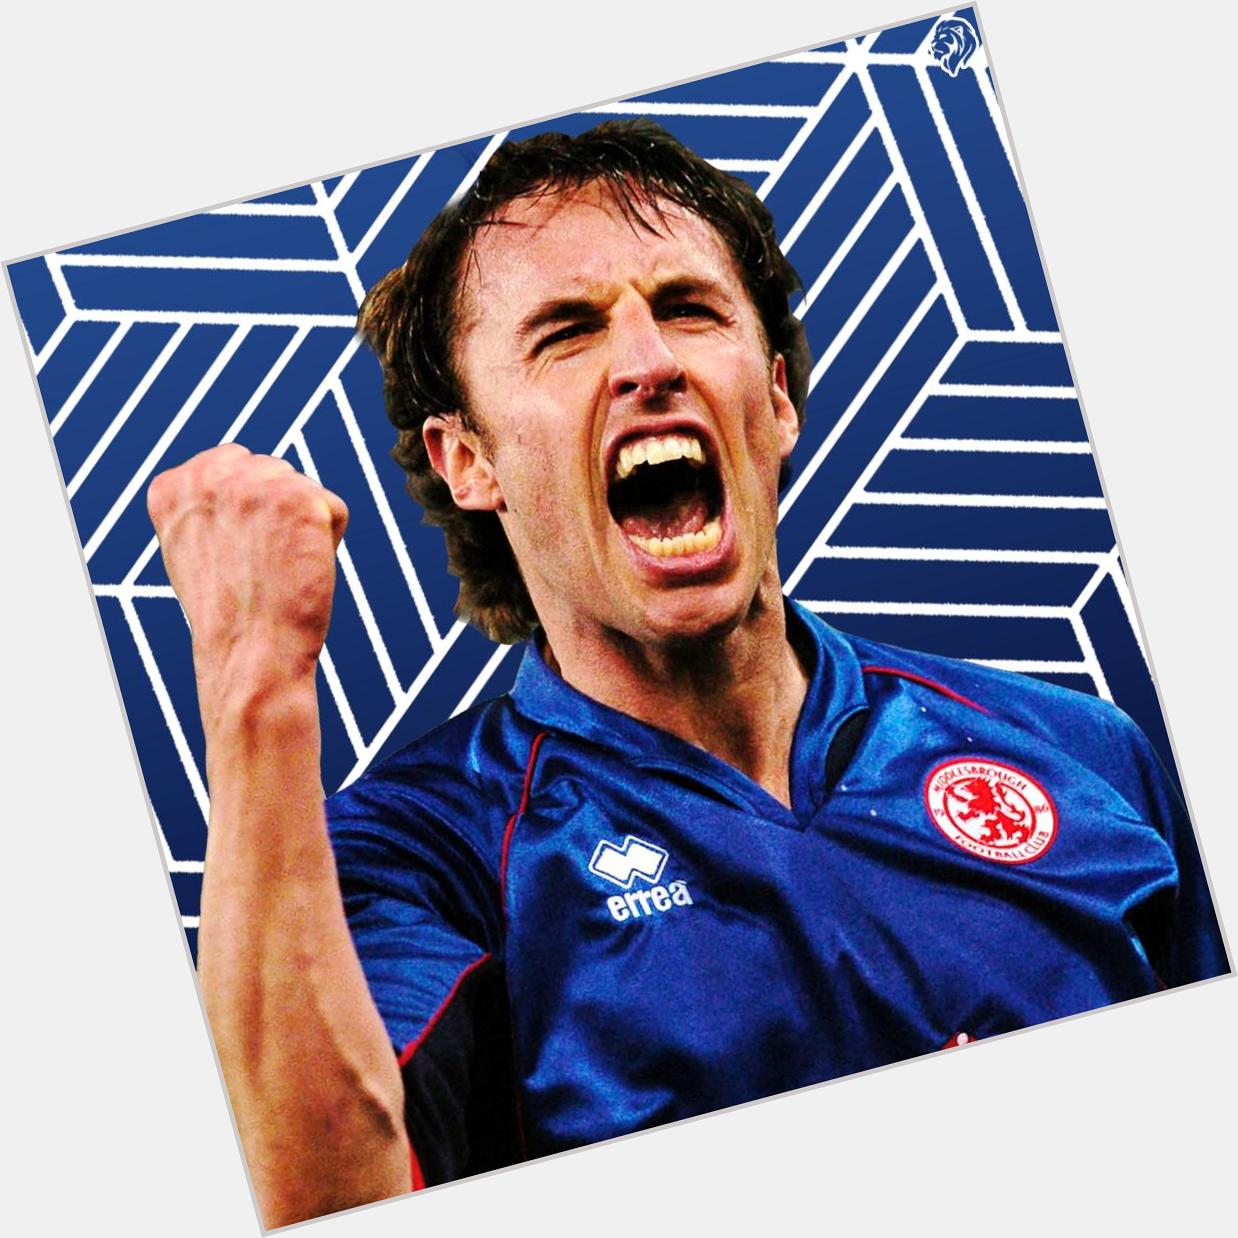 Happy 49th birthday to Carling Cup-winning captain and former Boro manager Gareth Southgate. 